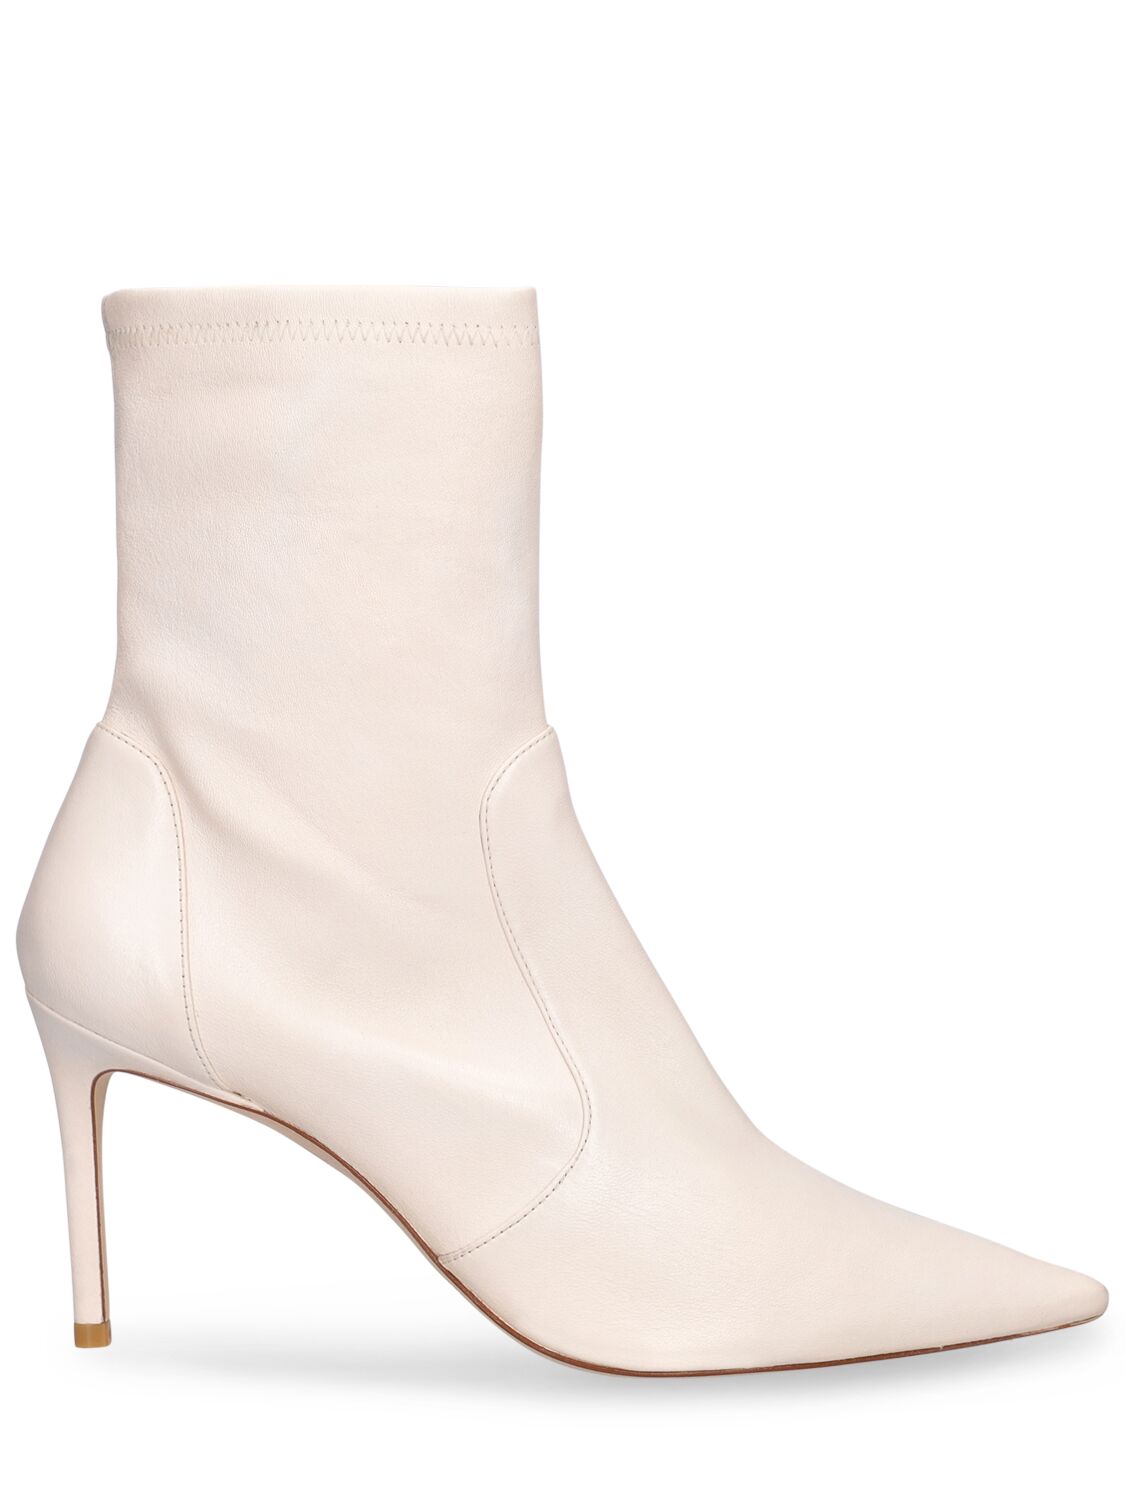 Shop Stuart Weitzman 85mm Stuart Leather Ankle Boots In Off White